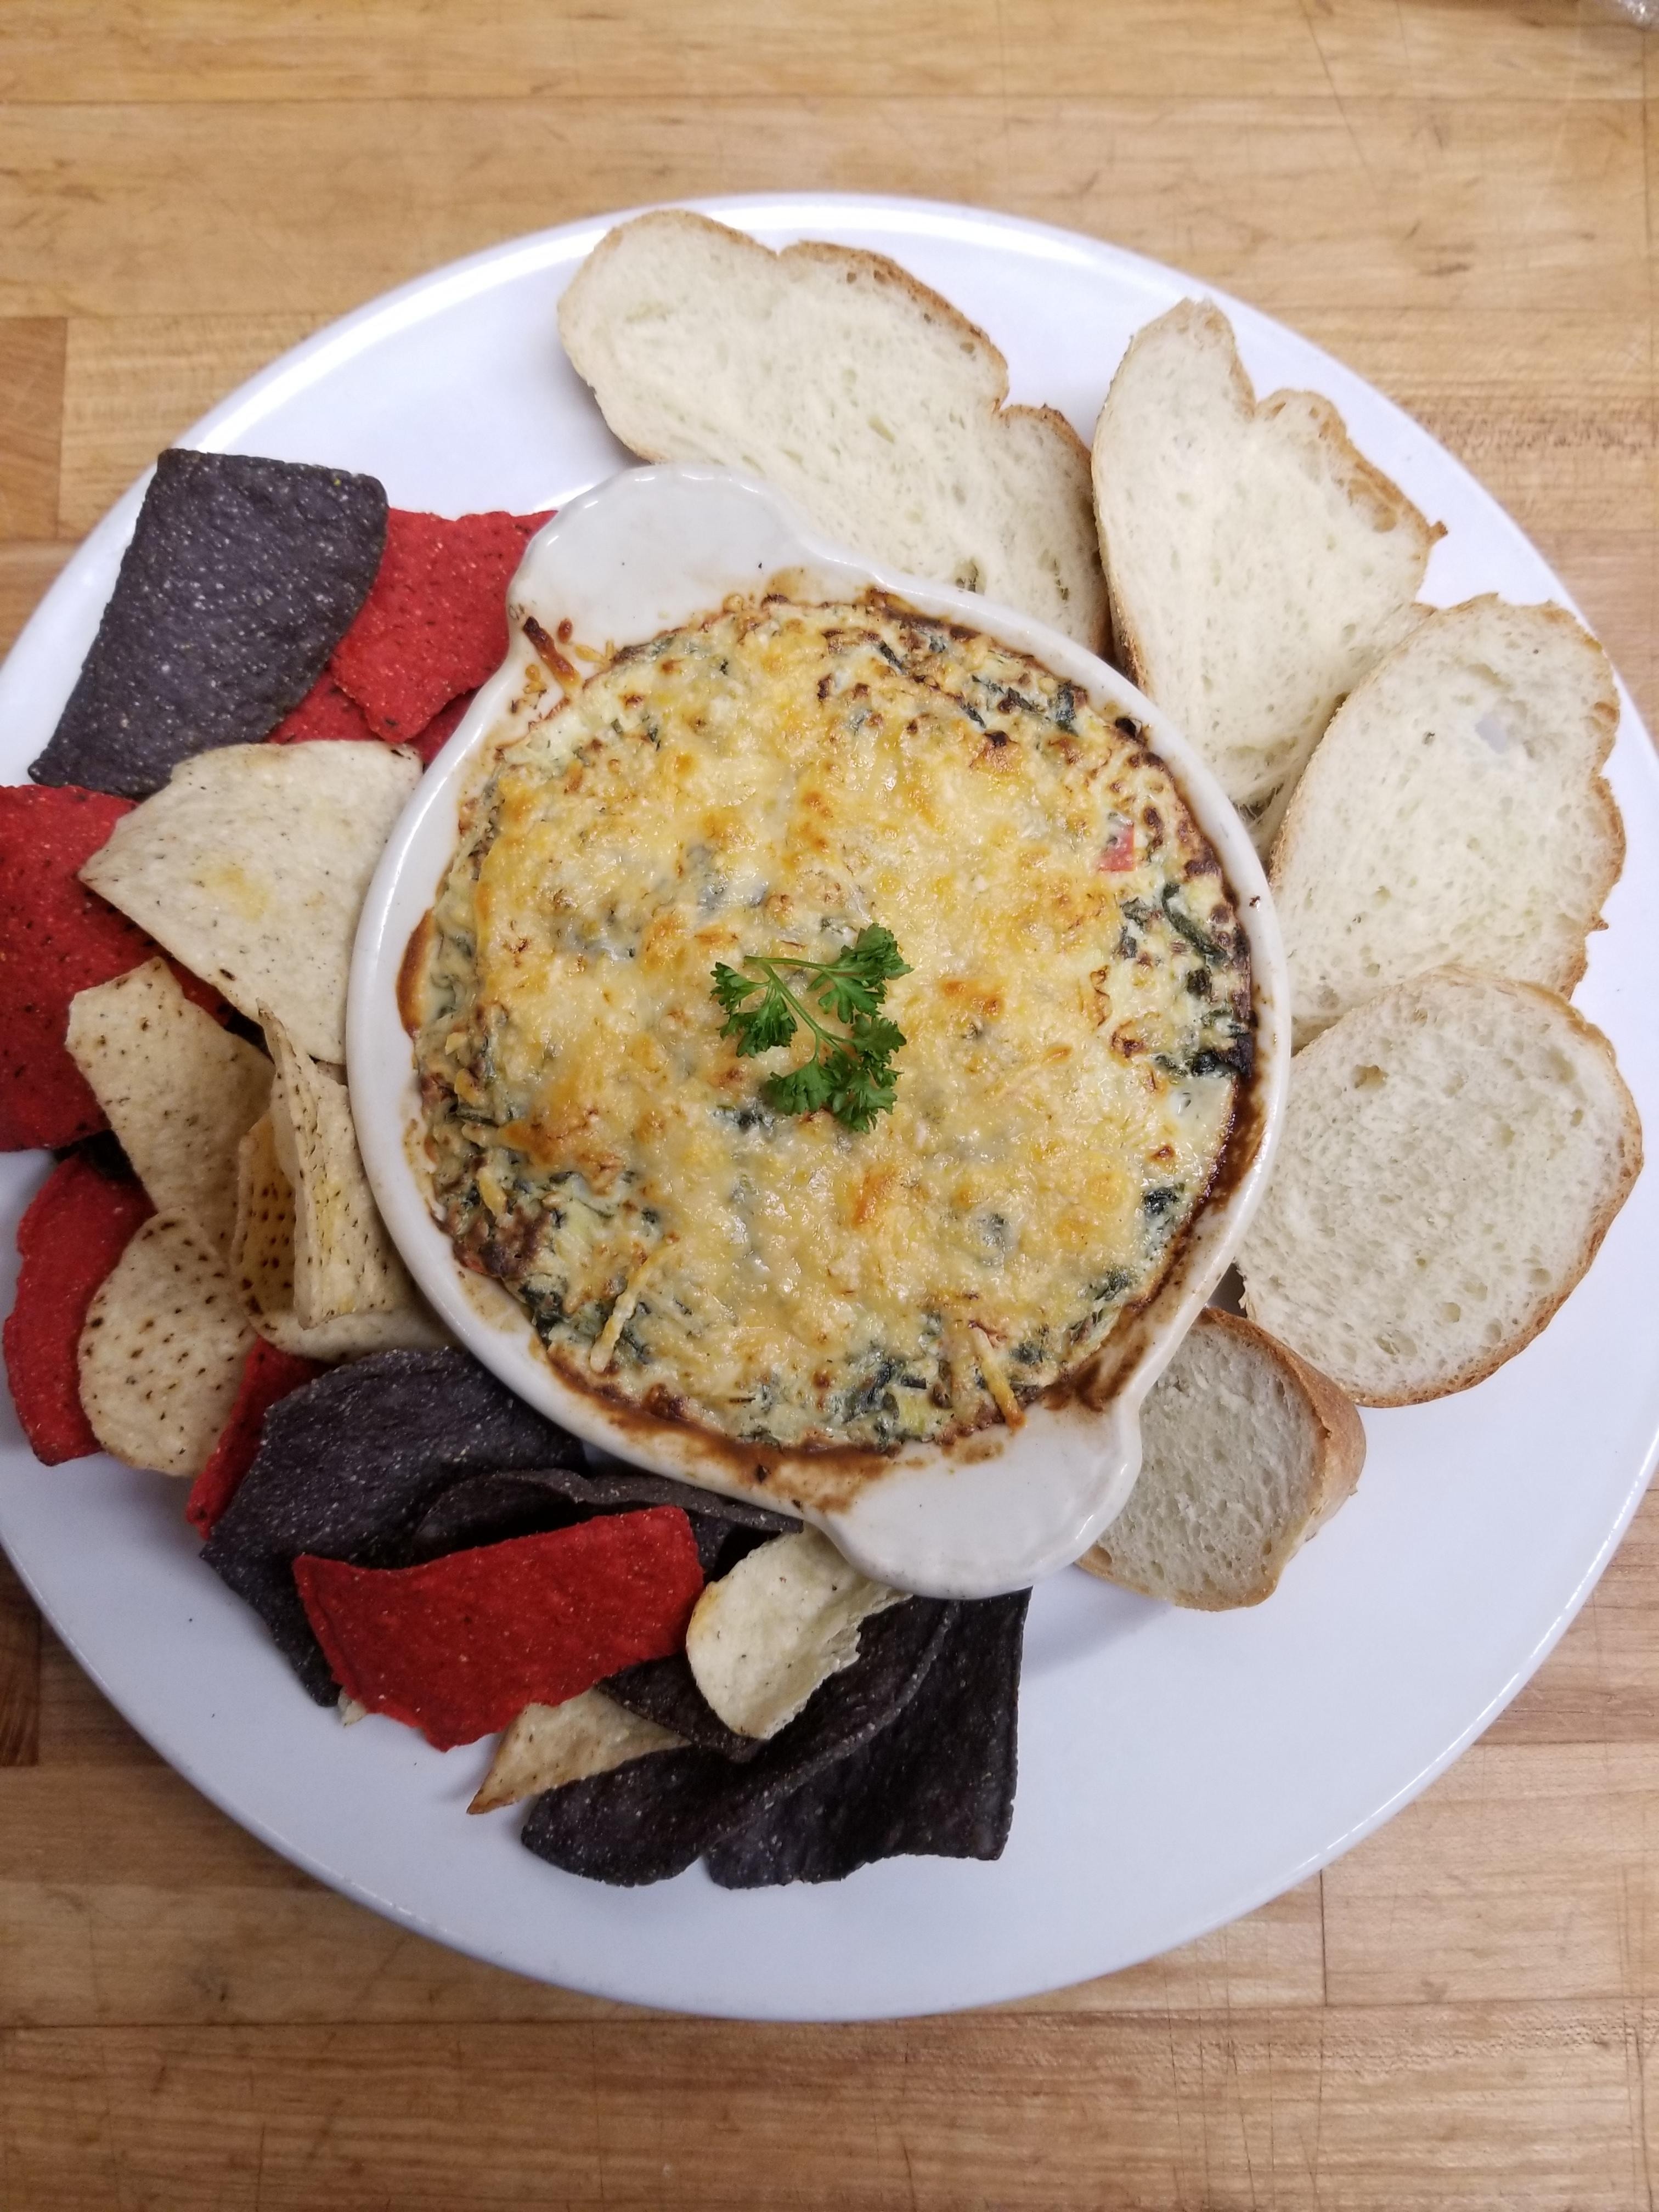 HOT BUBBLING SPINACH DIP